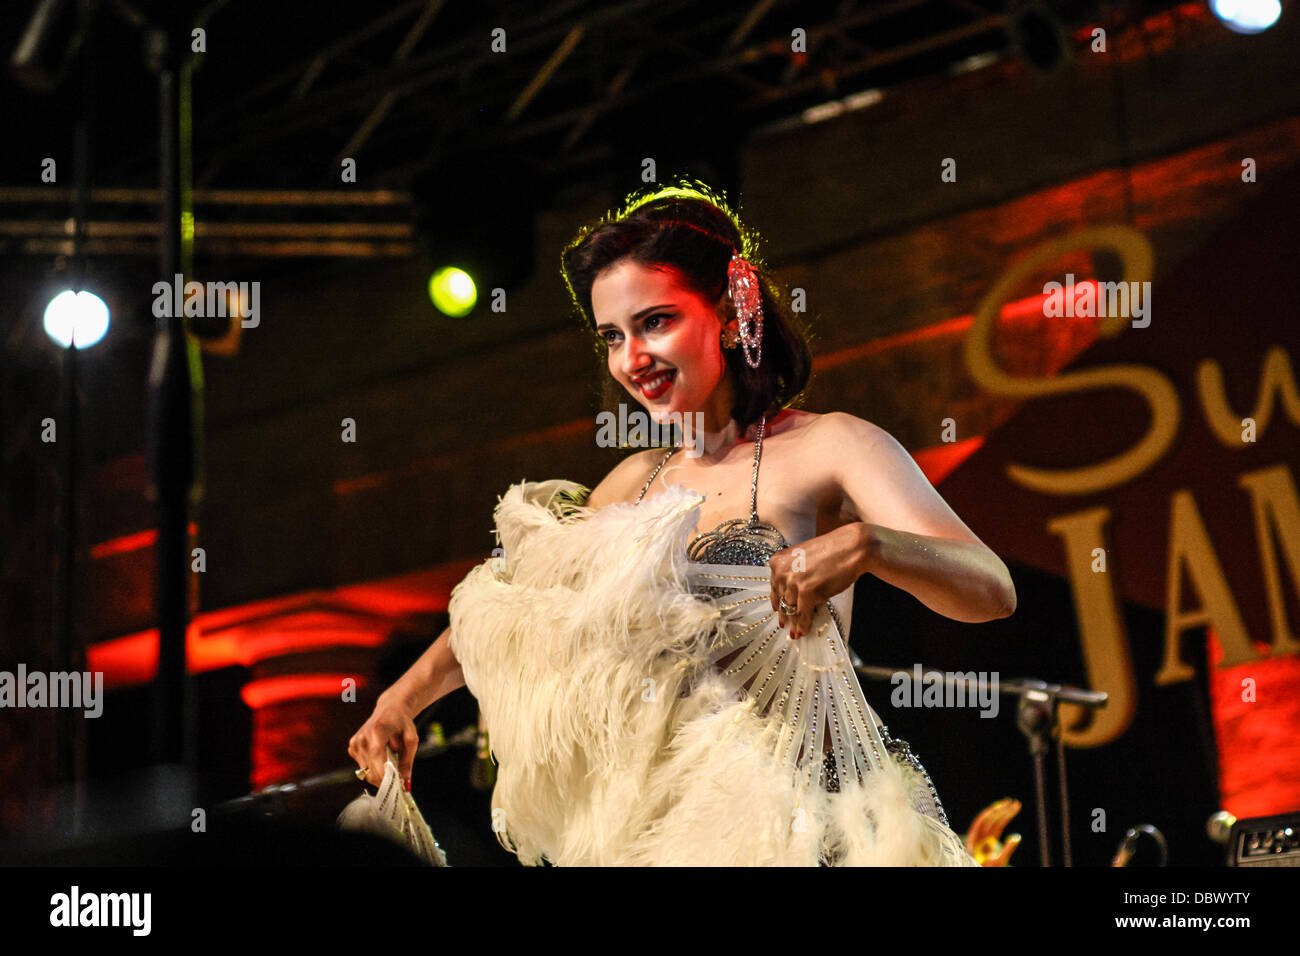 Senigallia, Italy. 2nd August, 2013. Waiting the Summer Jamboree  [International Festival 60's revival Rock & Roll], Slike Steve and the Gangsters, at Main stage in Foro Annonario, Italy on Aug 04, 2013. Credit:  Valerio Agolino/Alamy Live News Stock Photo